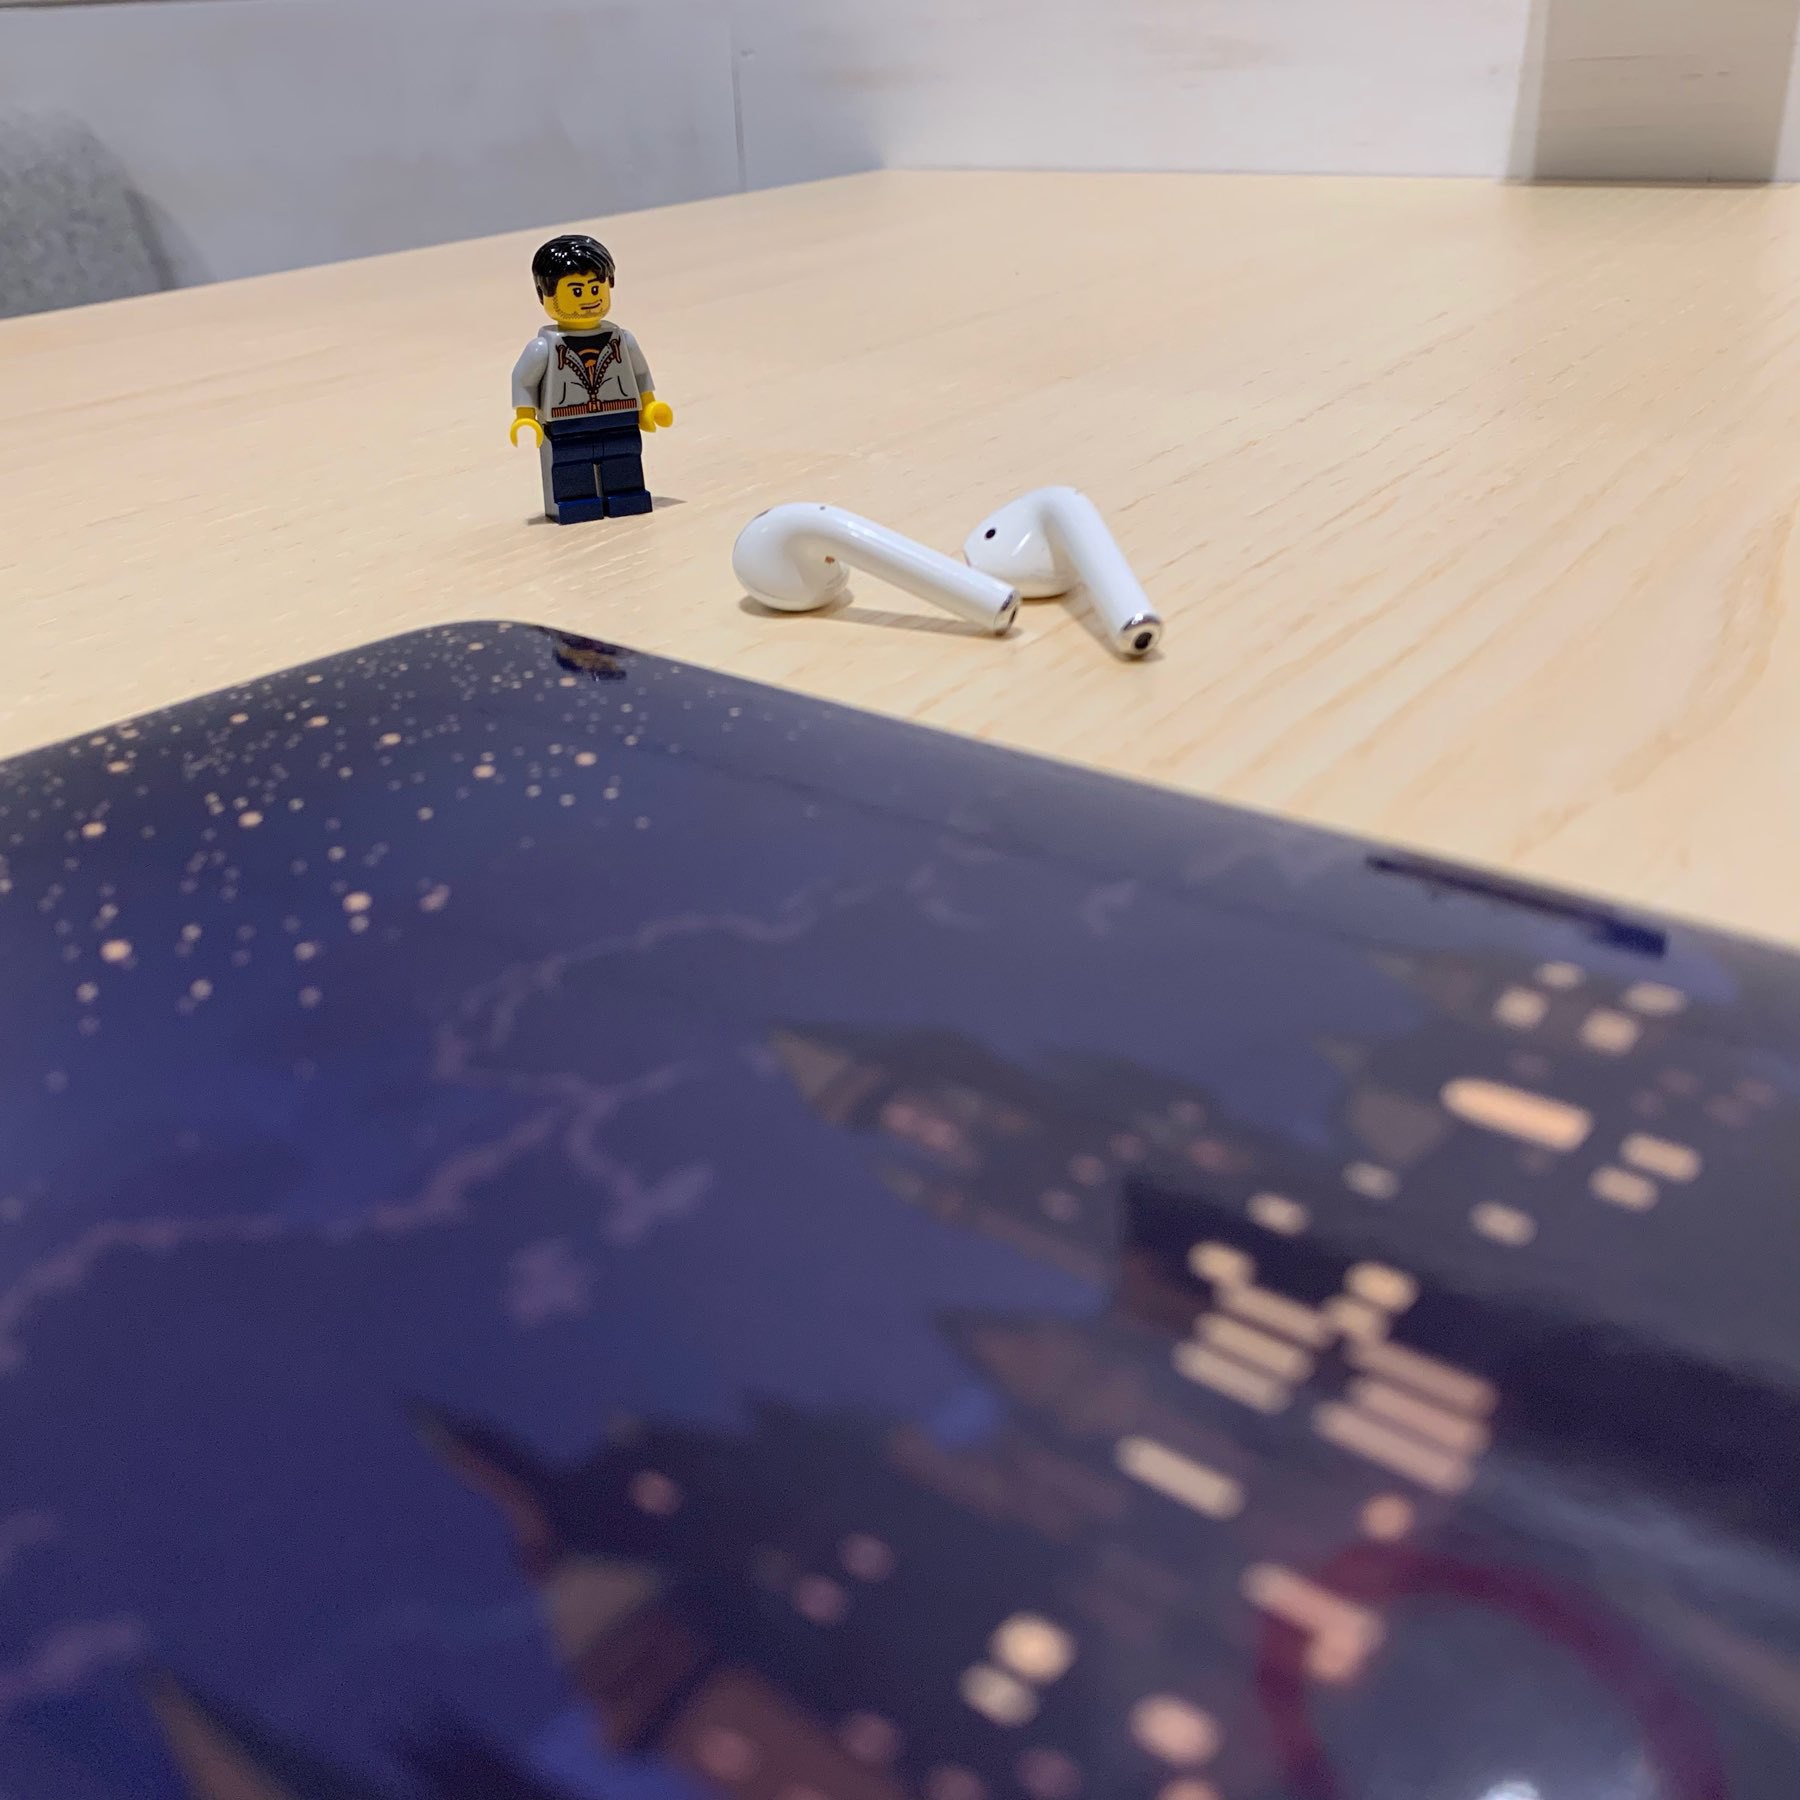 A LEGO minifigure and a pair of airpods next to a Hogwarts-skinned MacBook.